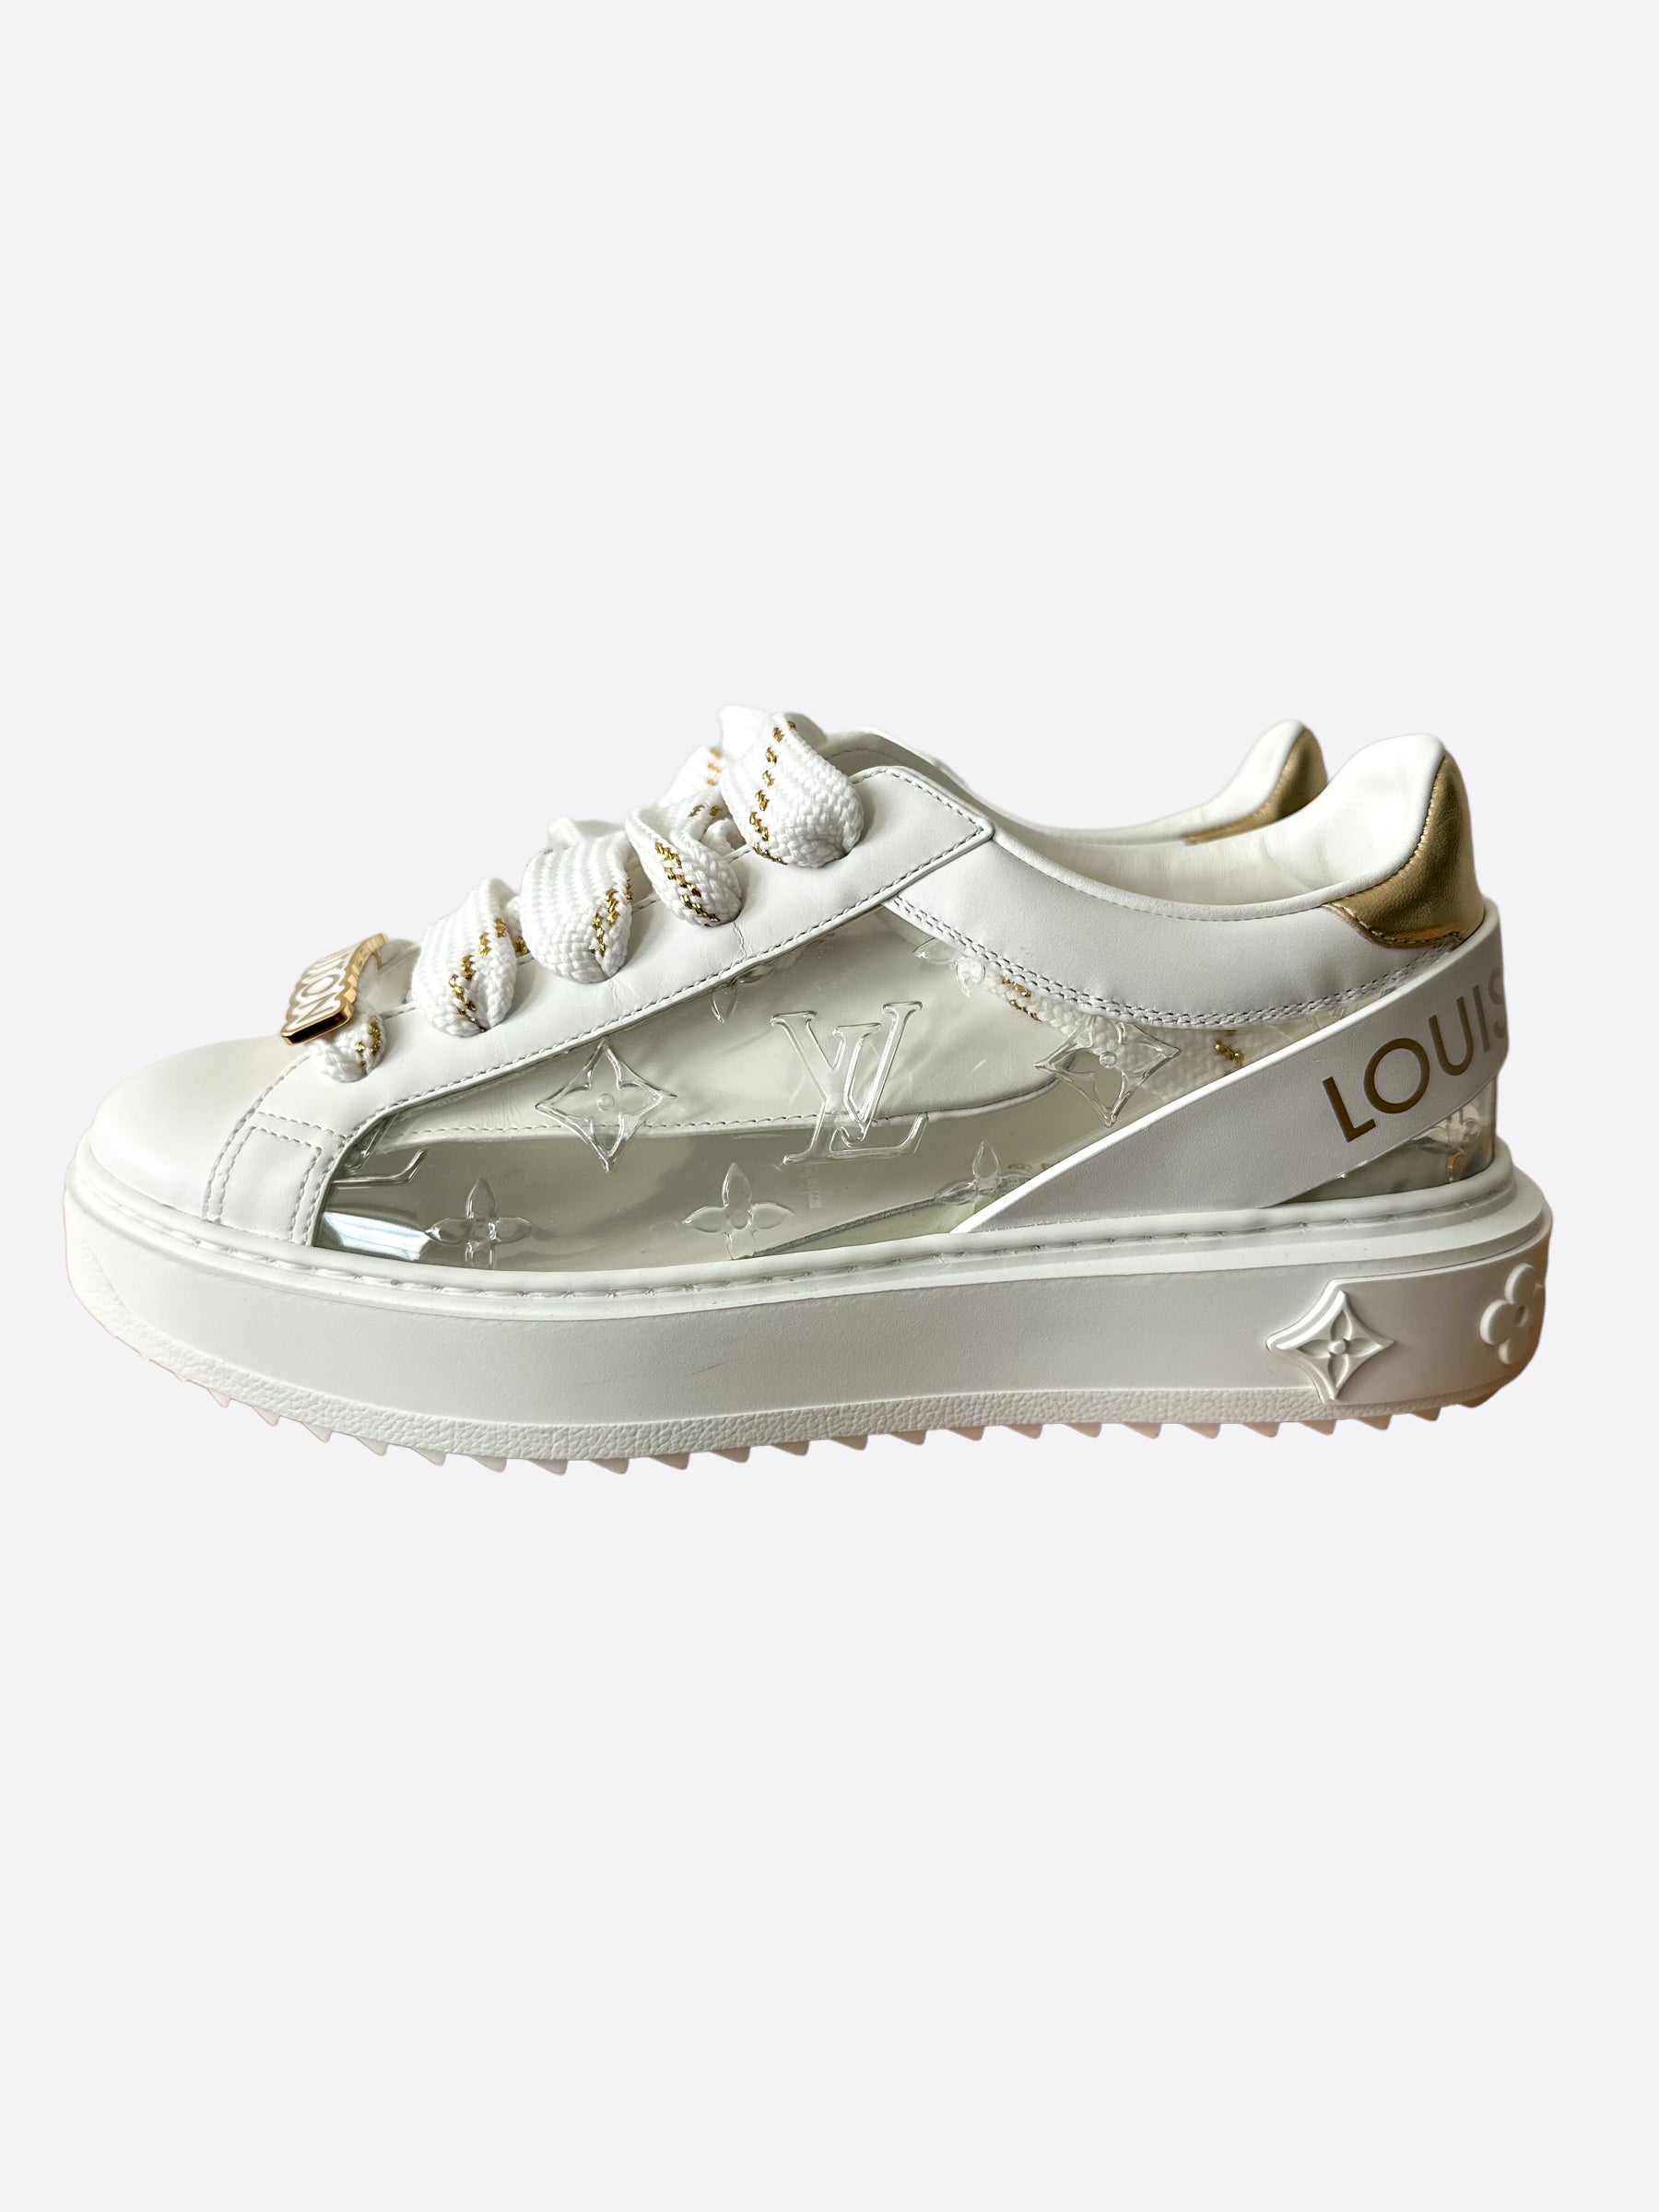 Louis Vuitton Releases Transparent Time Out Sneaker